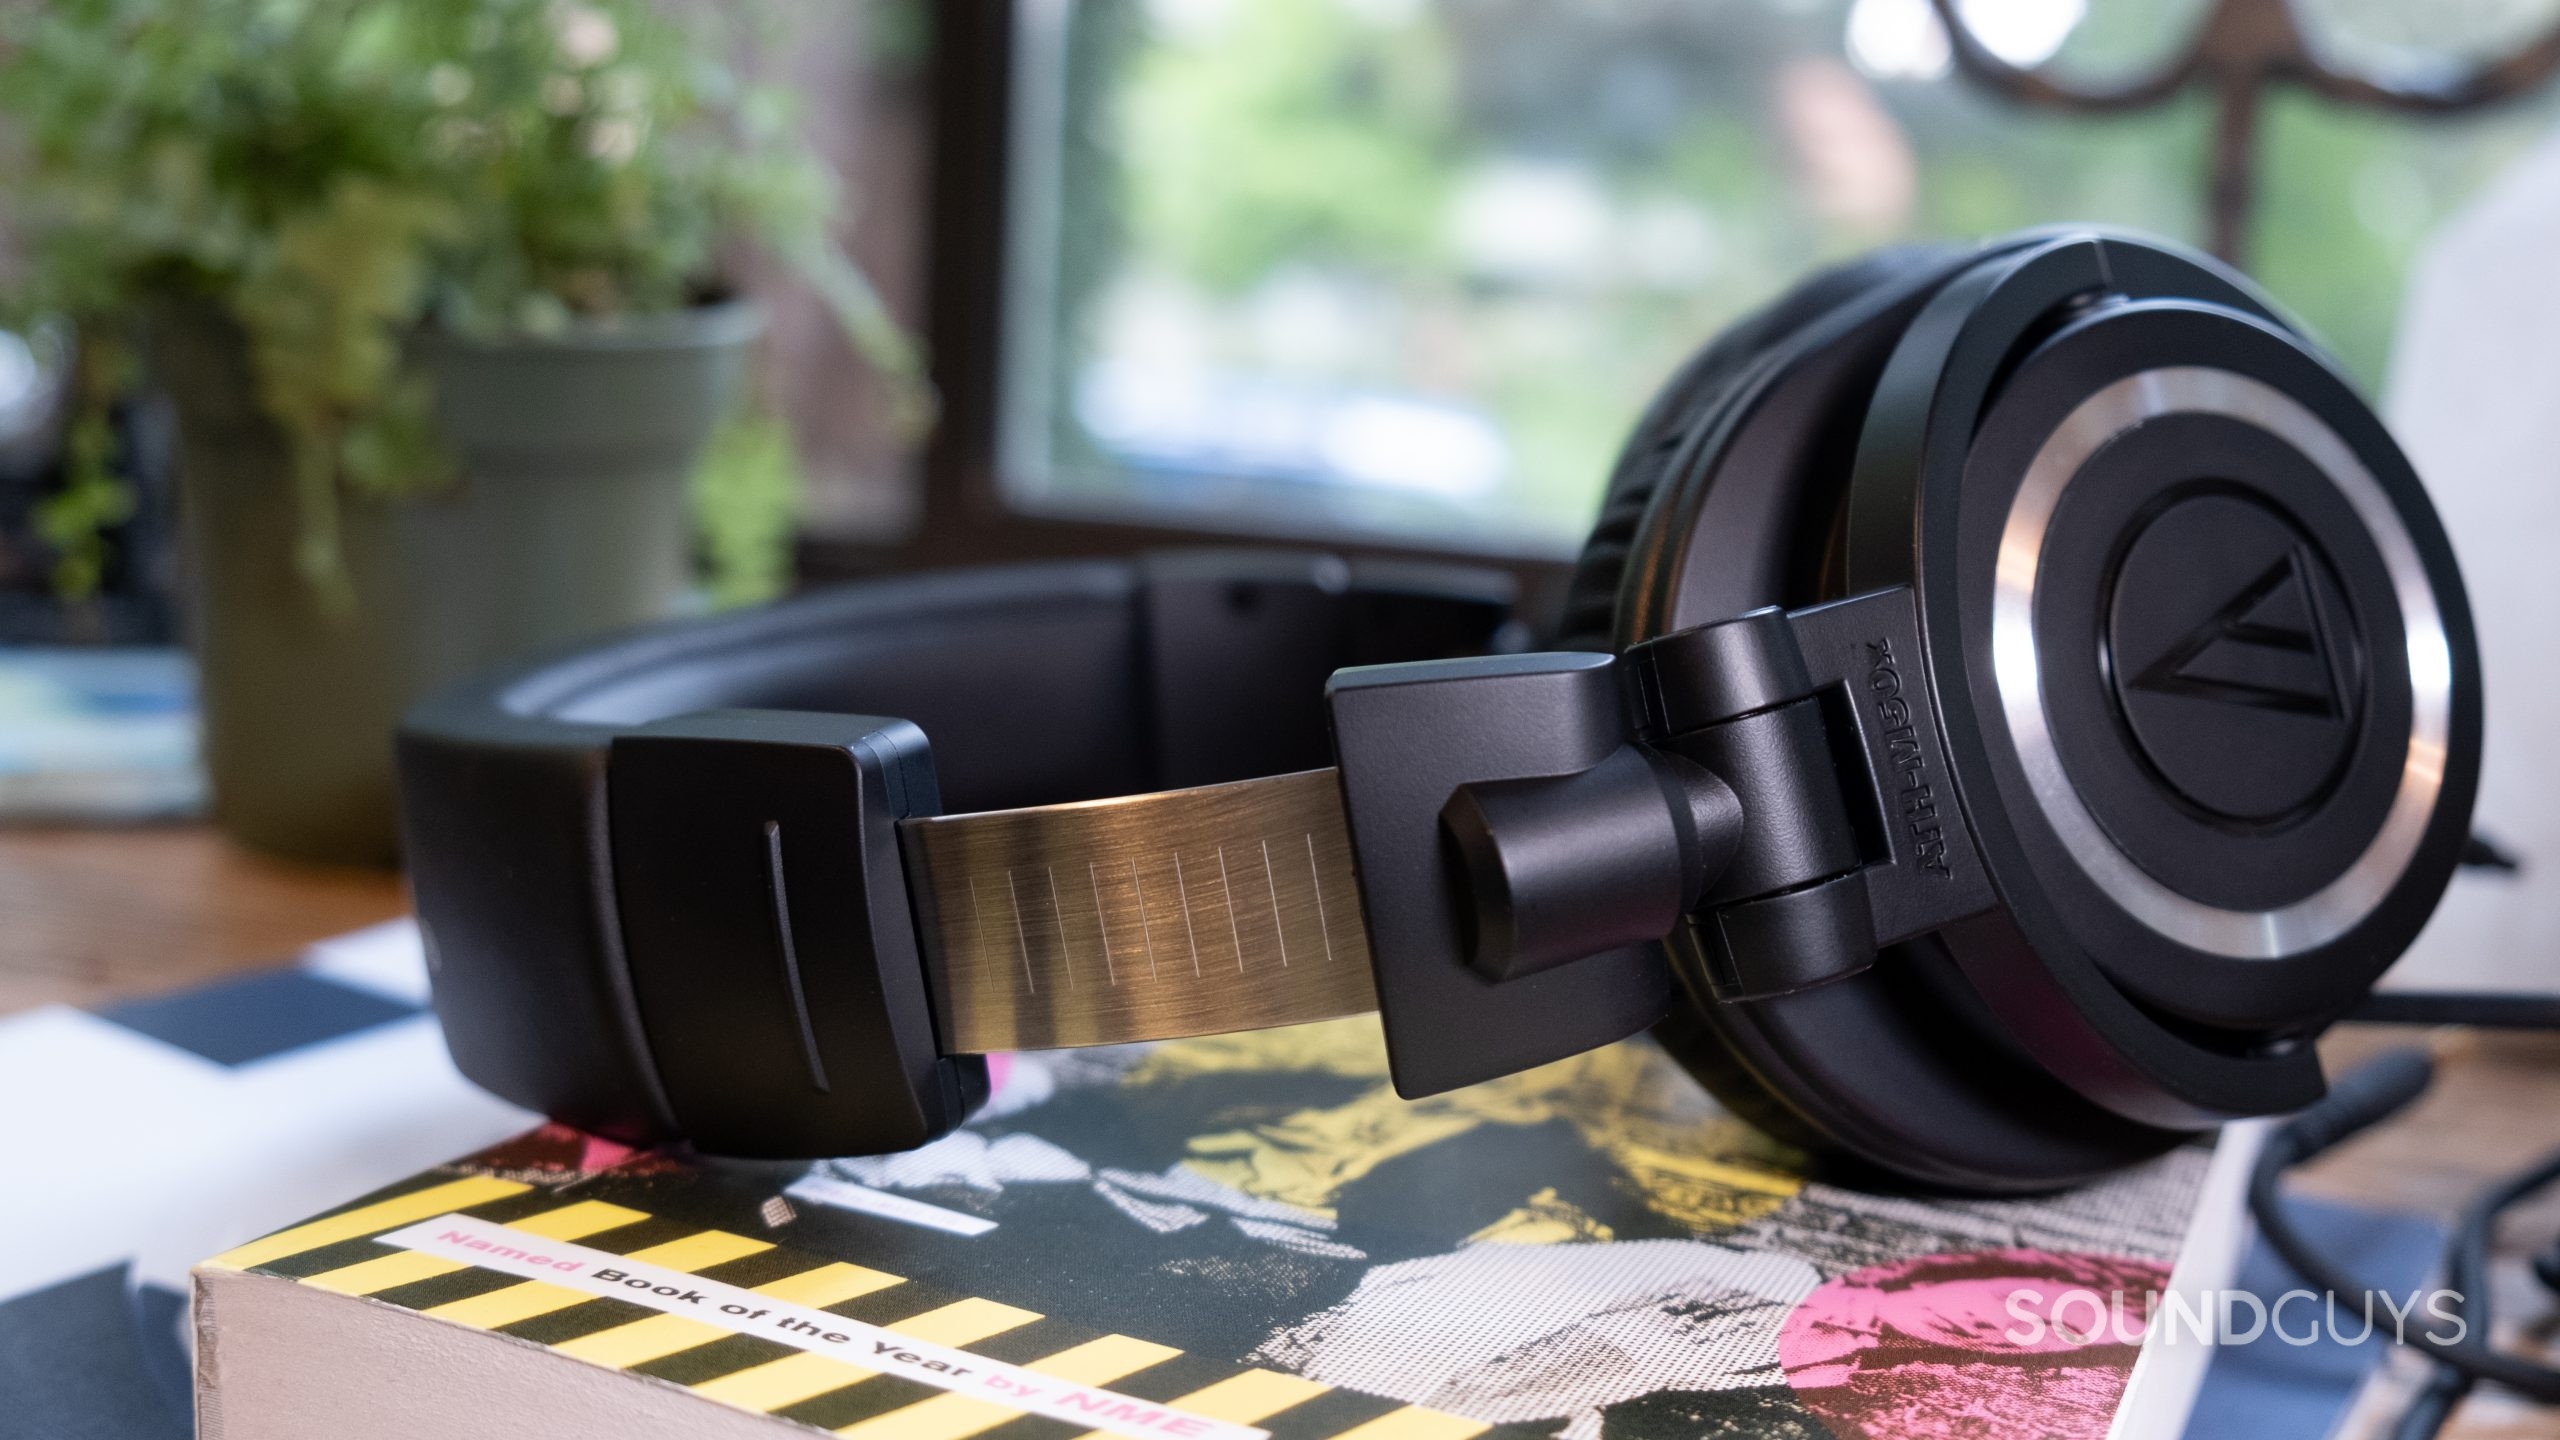 Audio-Technica ATH-M50X review: A durable standard - SoundGuys